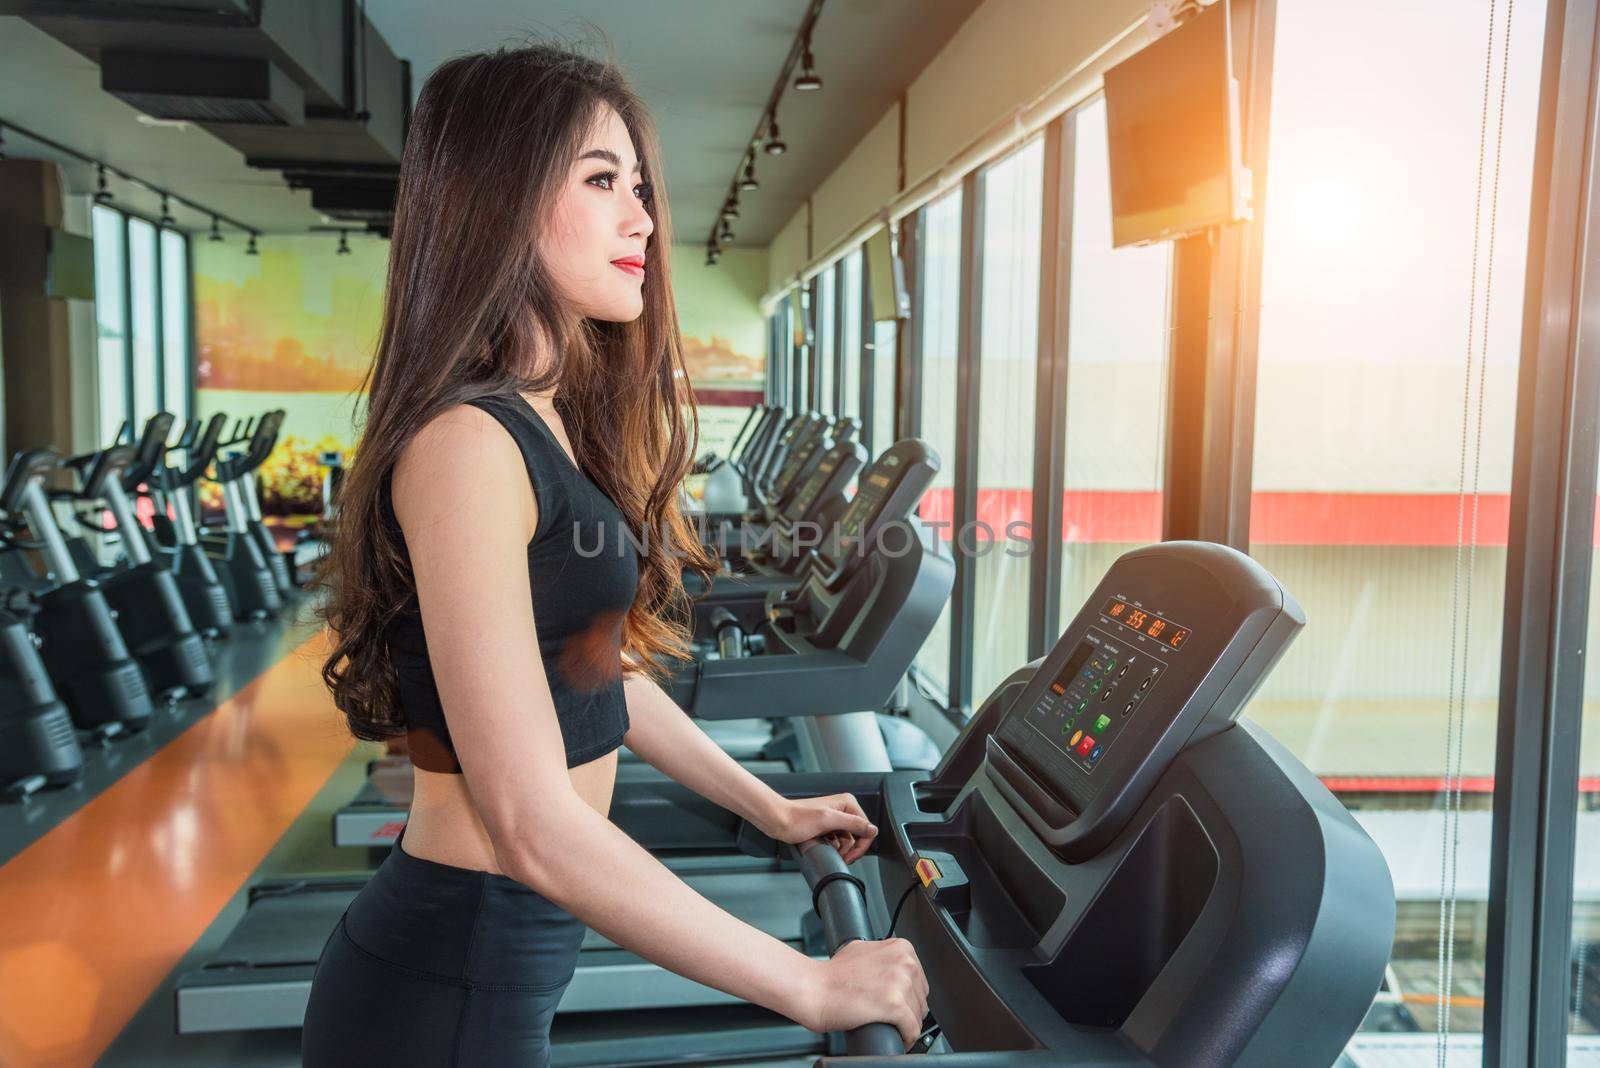 Asian sport woman walking or running on treadmill equipment in fitness workout gym. Sport and Beauty concept. Workout and Strength Training theme. Cardio and Diet theme